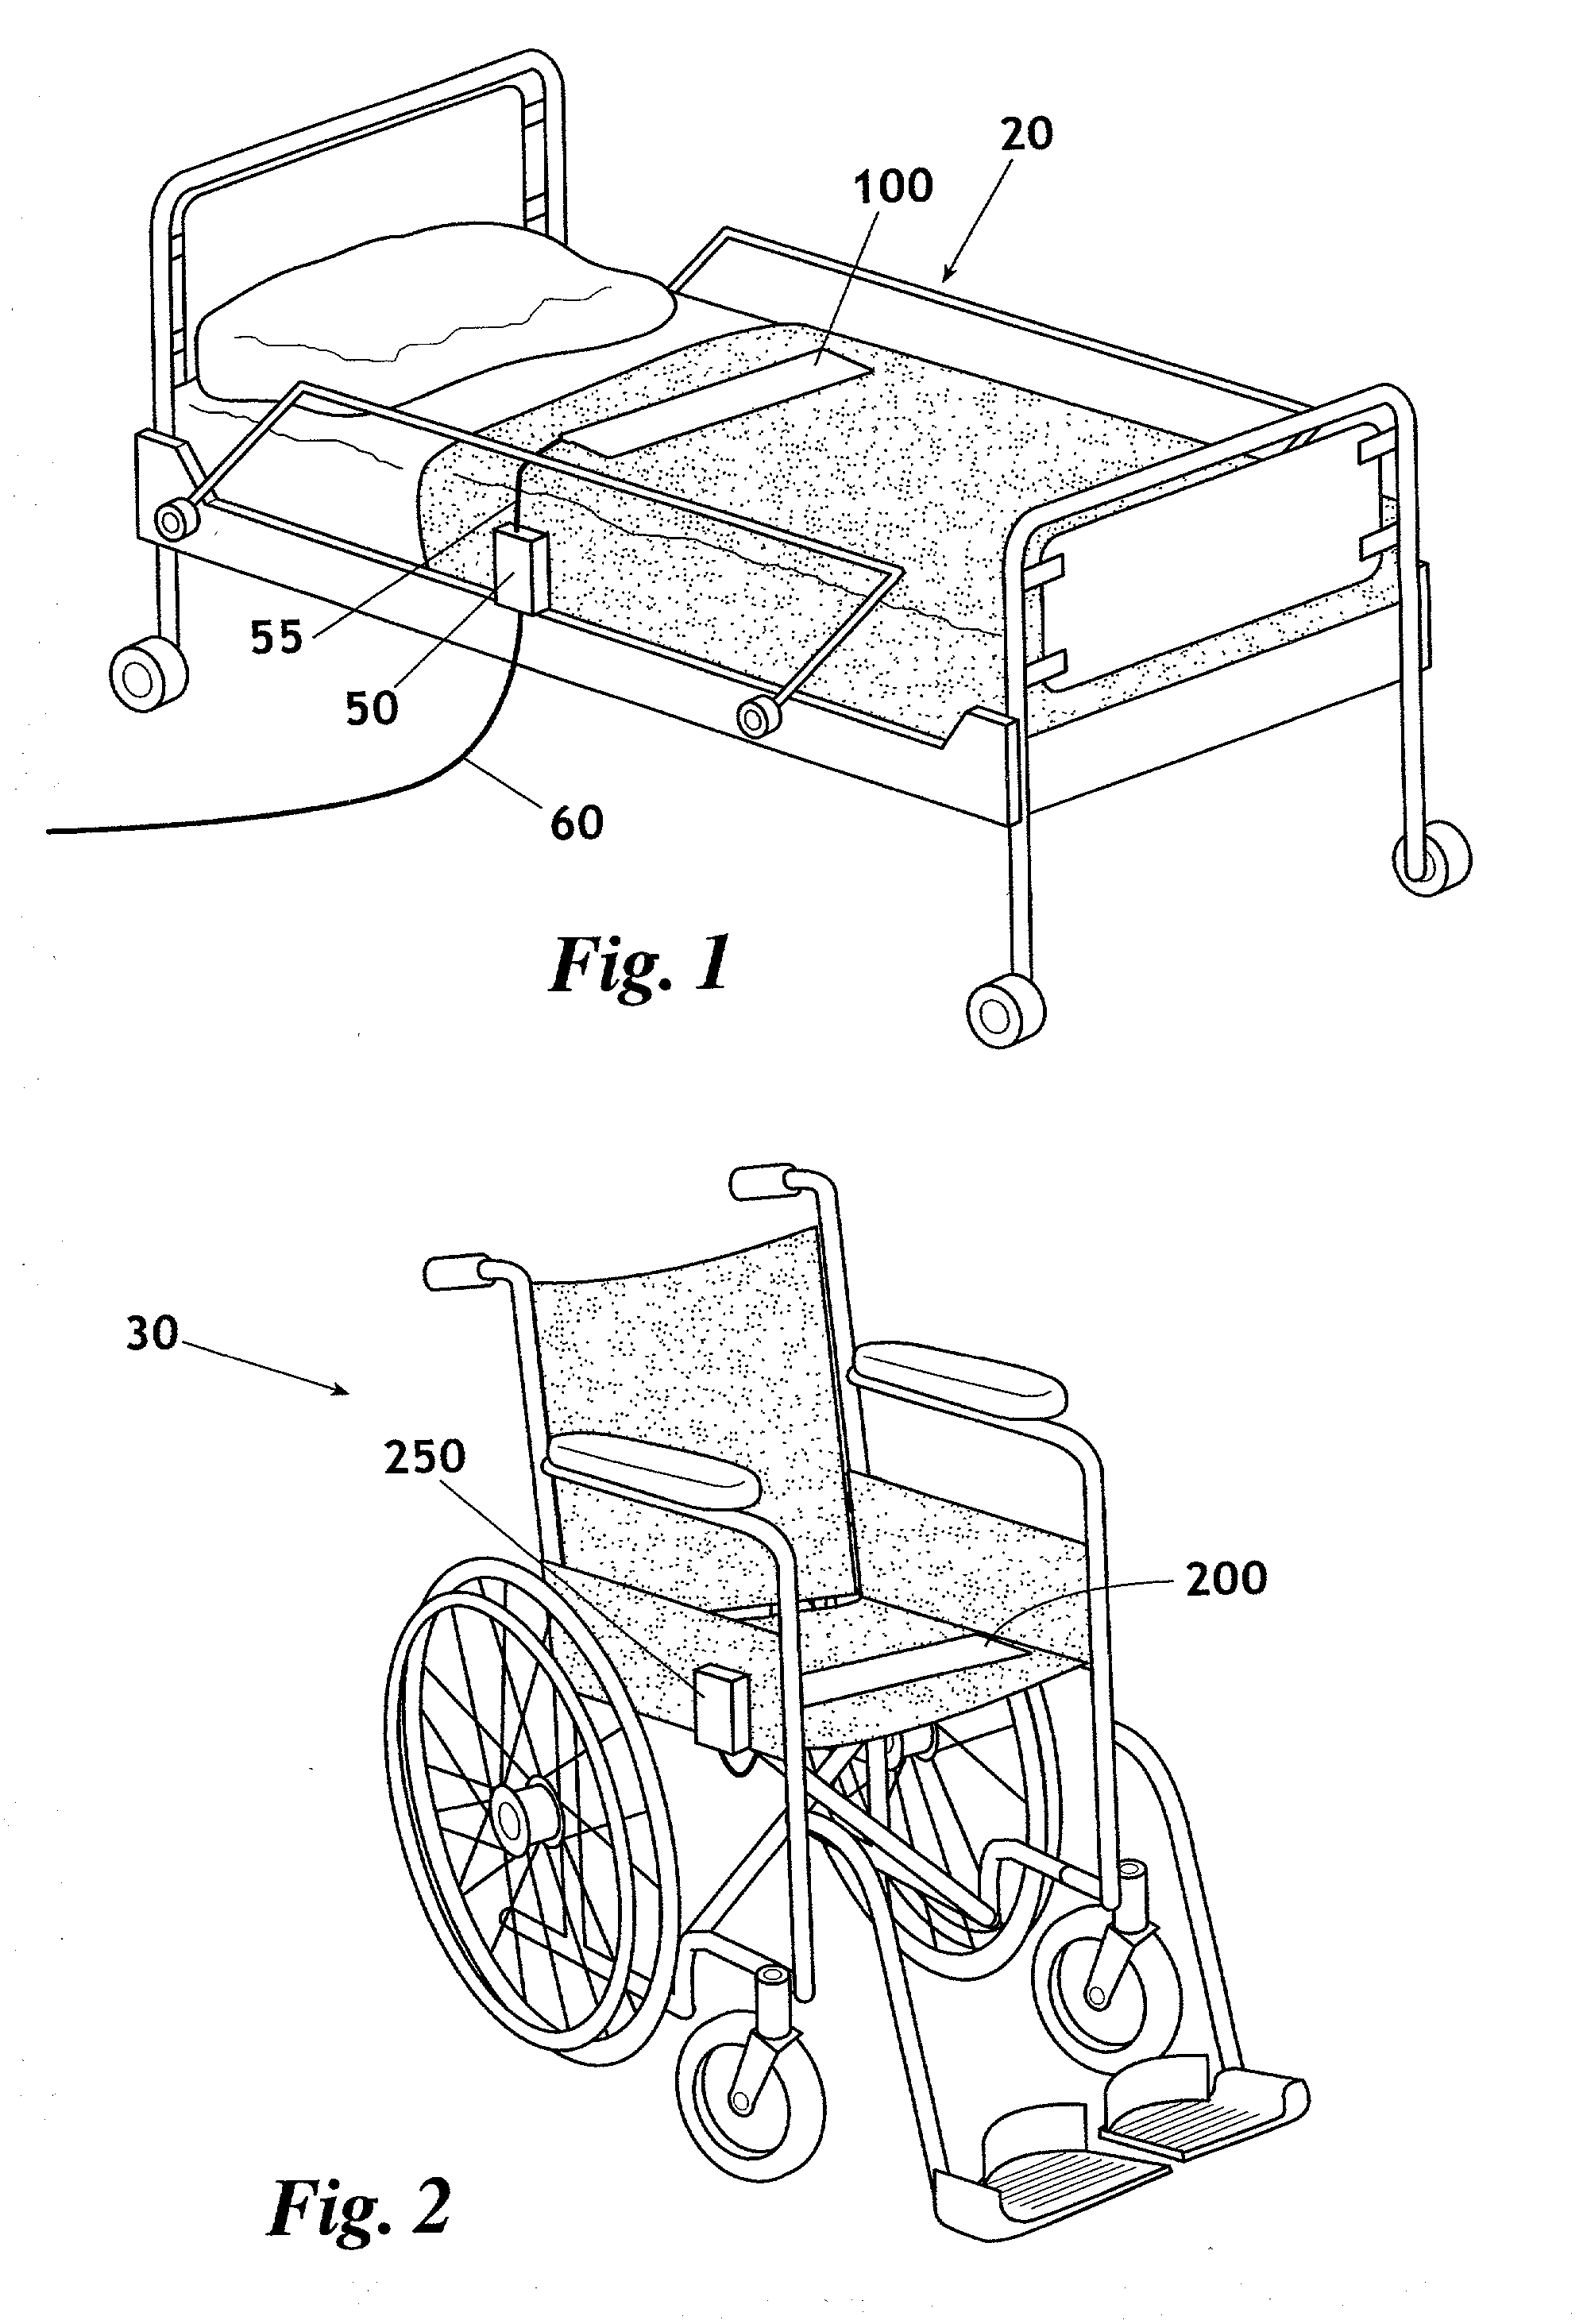 Apparatus for lighting a patient monitor front panel